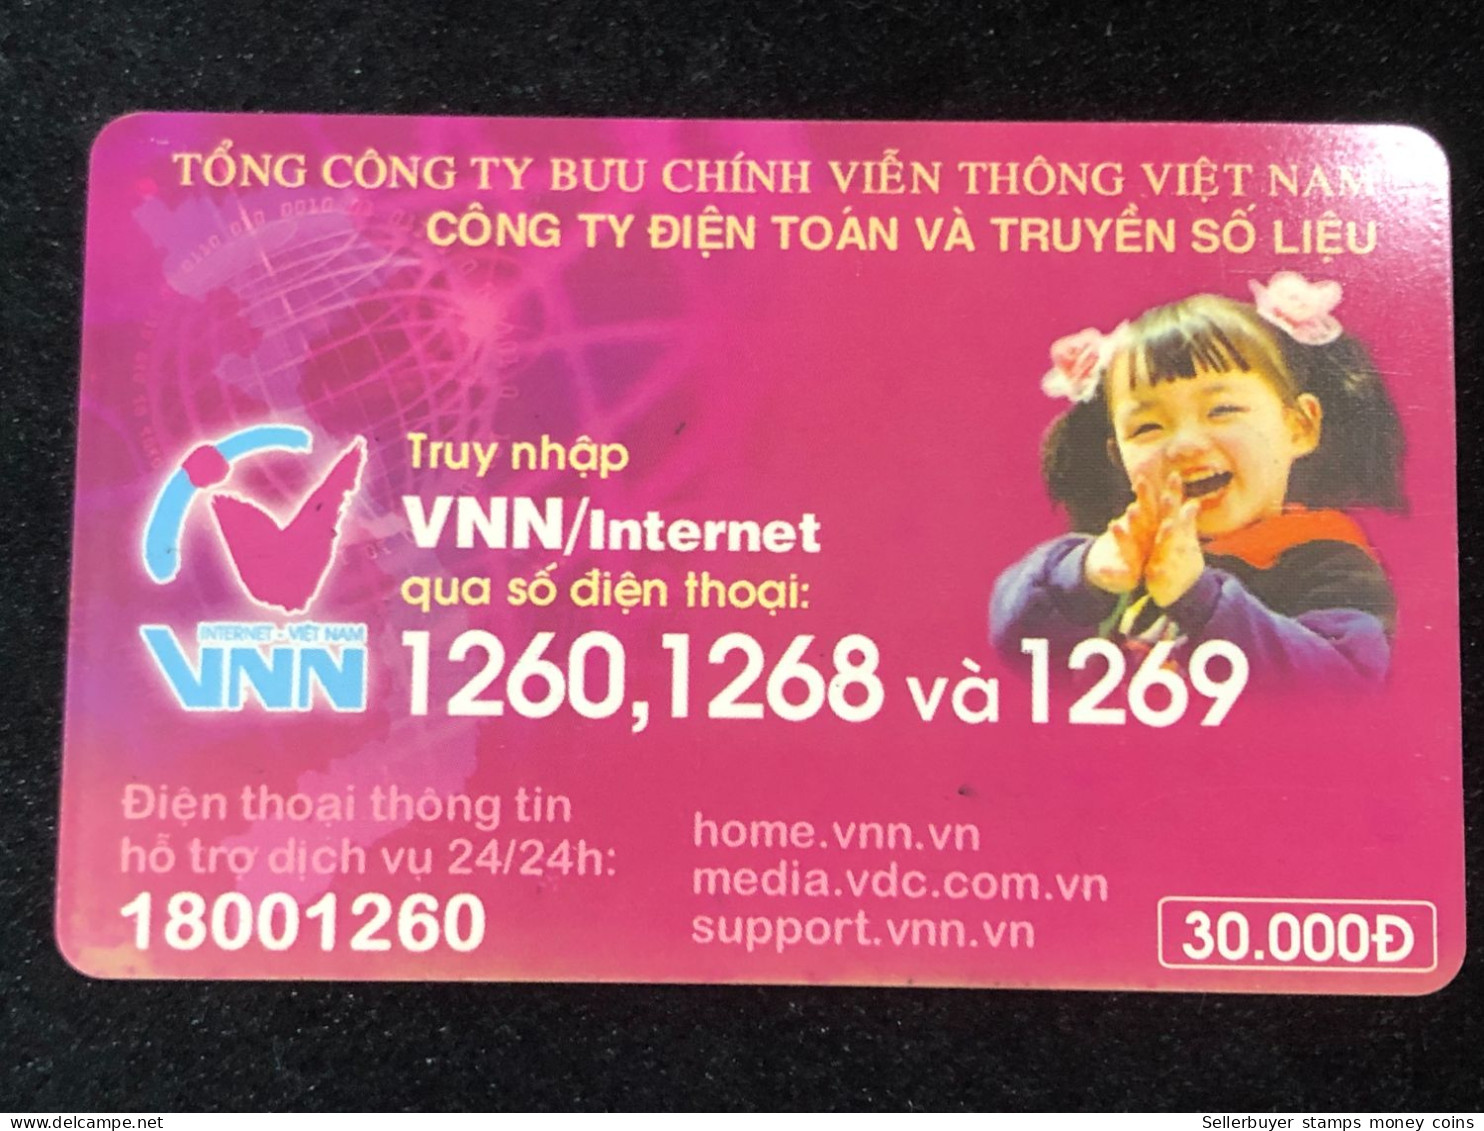 Vietnam This Is A Vietnamese Cardphone Card From 2001 And 2005(1269- 30 000dong)-1pcs - Vietnam